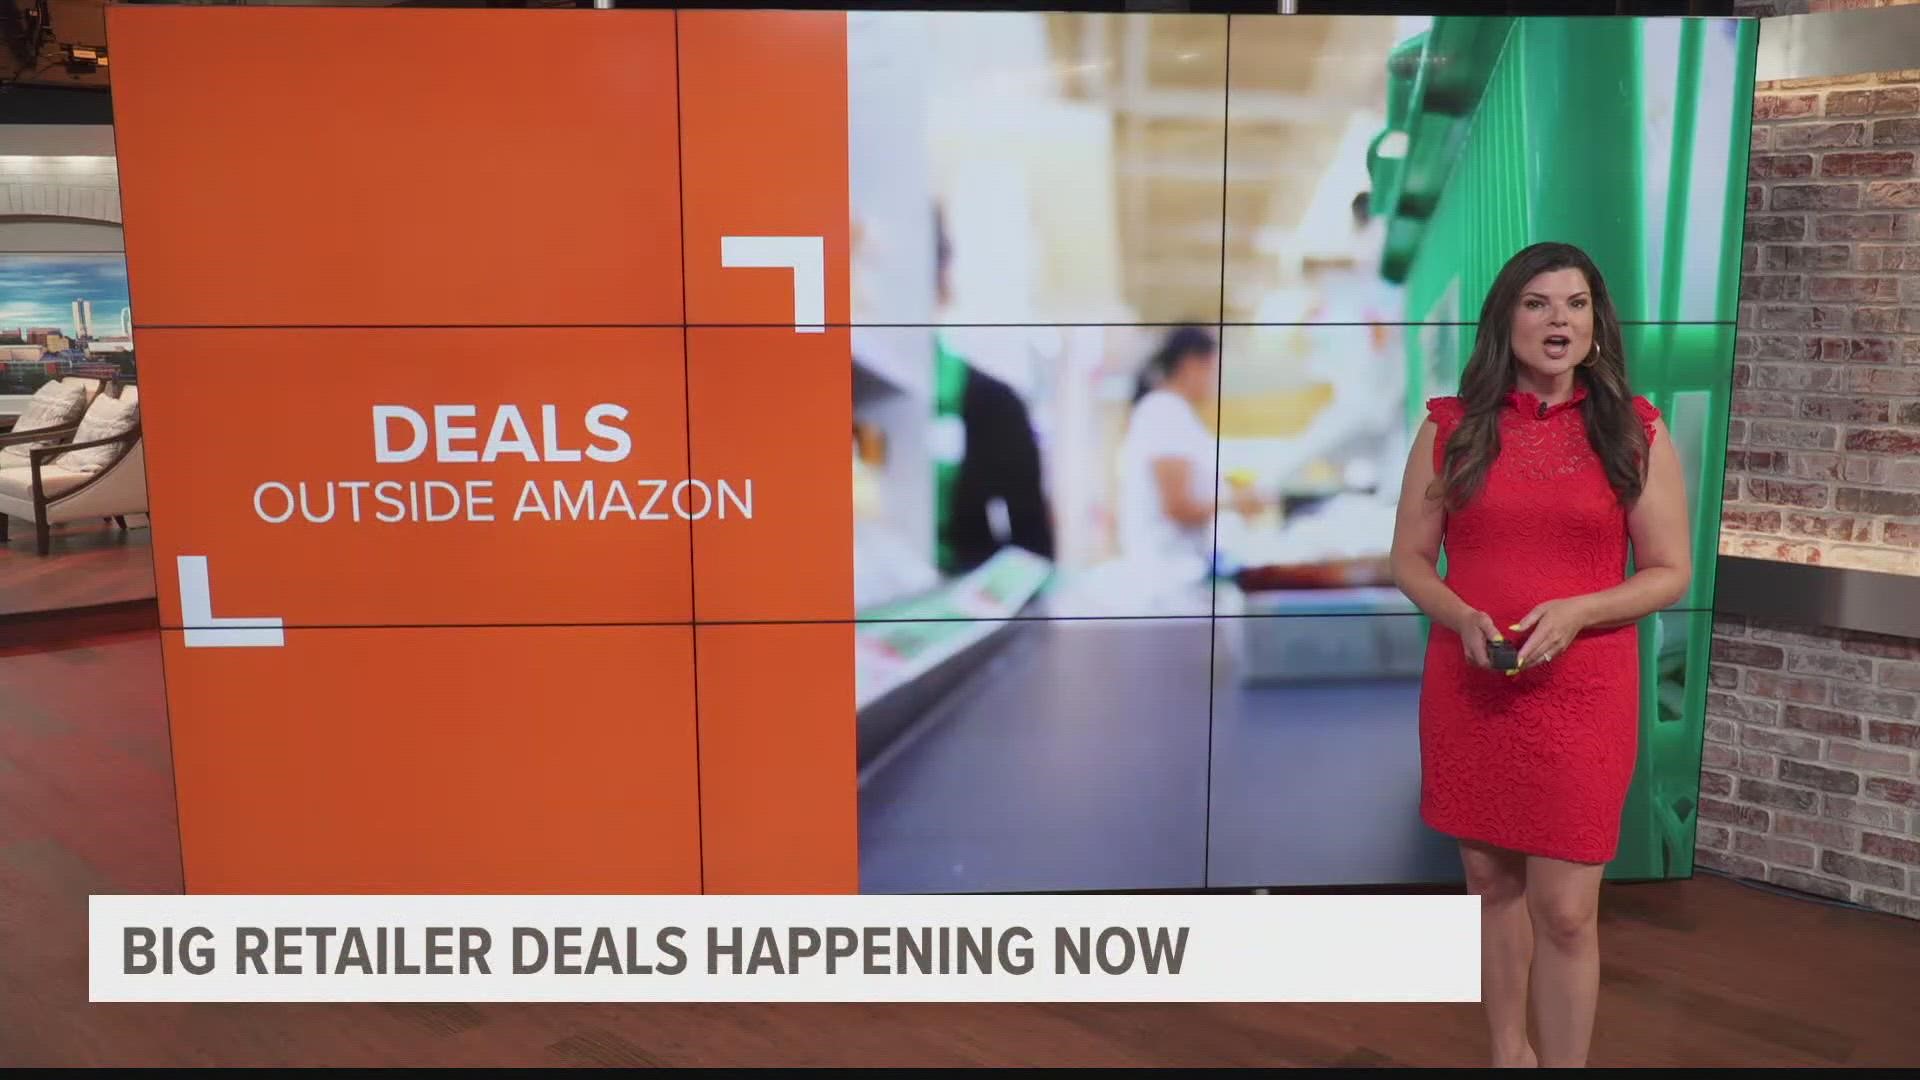 Here are some of the deals happening during Prime Day 2022!